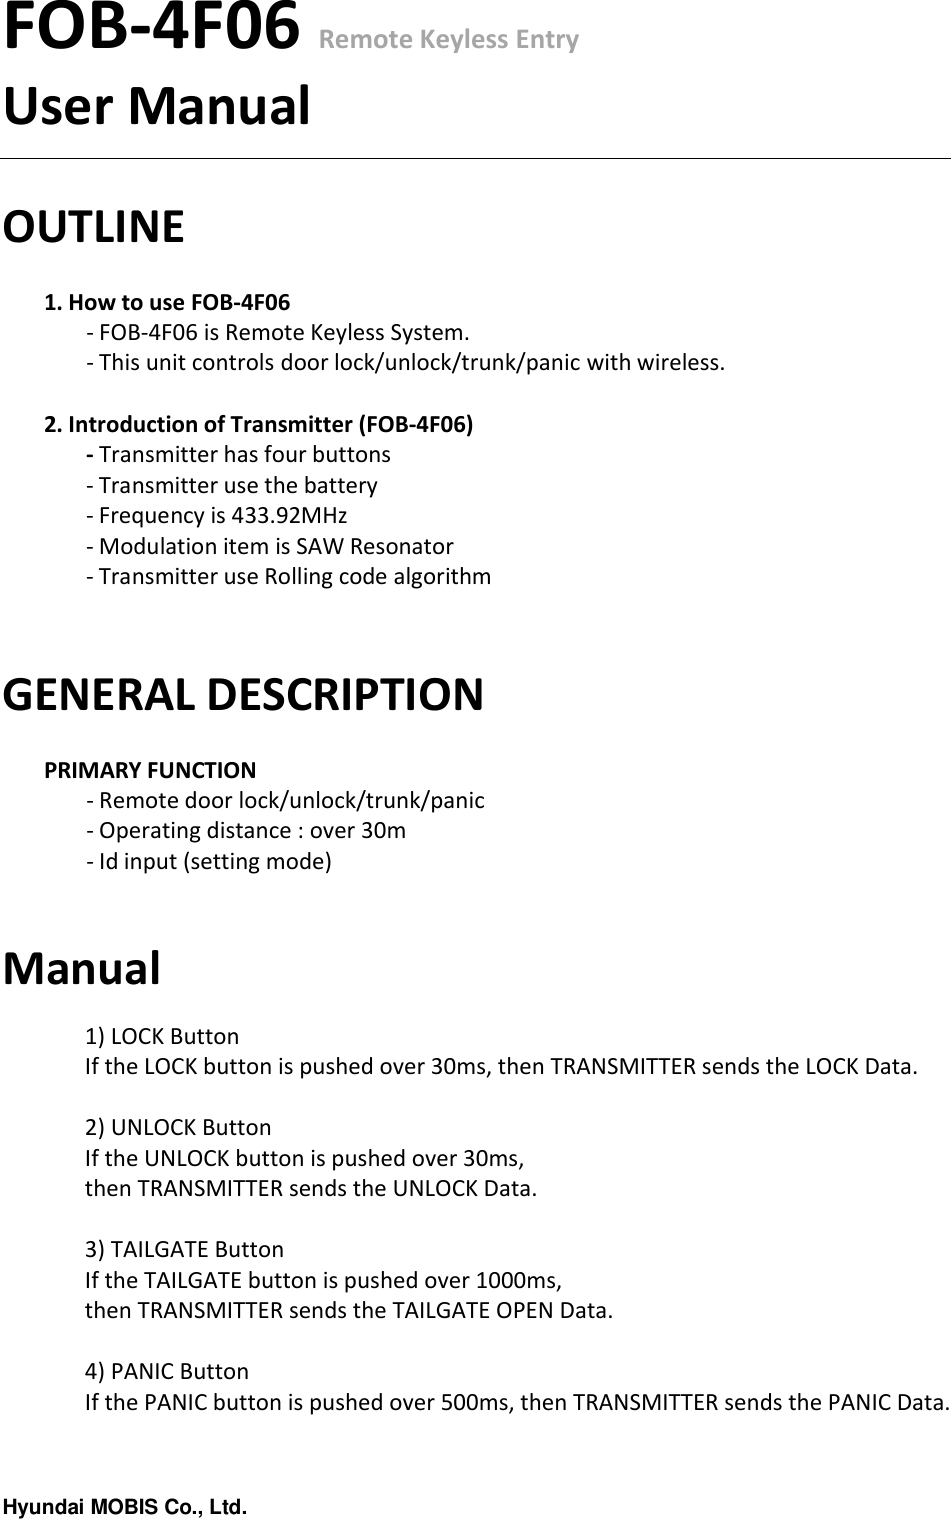 Hyundai MOBIS Co., Ltd.FOB-4F06 Remote Keyless EntryUser ManualOUTLINE1. How to use FOB-4F06- FOB-4F06 is Remote Keyless System.- This unit controls door lock/unlock/trunk/panic with wireless.2. Introduction of Transmitter (FOB-4F06)- Transmitter has four buttons- Transmitter use the battery- Frequency is 433.92MHz- Modulation item is SAW Resonator- Transmitter use Rolling code algorithmGENERAL DESCRIPTIONPRIMARY FUNCTION- Remote door lock/unlock/trunk/panic - Operating distance : over 30m - Id input (setting mode)Manual1) LOCK ButtonIf the LOCK button is pushed over 30ms, then TRANSMITTER sends the LOCK Data.2) UNLOCK ButtonIf the UNLOCK button is pushed over 30ms, then TRANSMITTER sends the UNLOCK Data.3) TAILGATE ButtonIf the TAILGATE button is pushed over 1000ms, then TRANSMITTER sends the TAILGATE OPEN Data.4) PANIC ButtonIf the PANIC button is pushed over 500ms, then TRANSMITTER sends the PANIC Data.